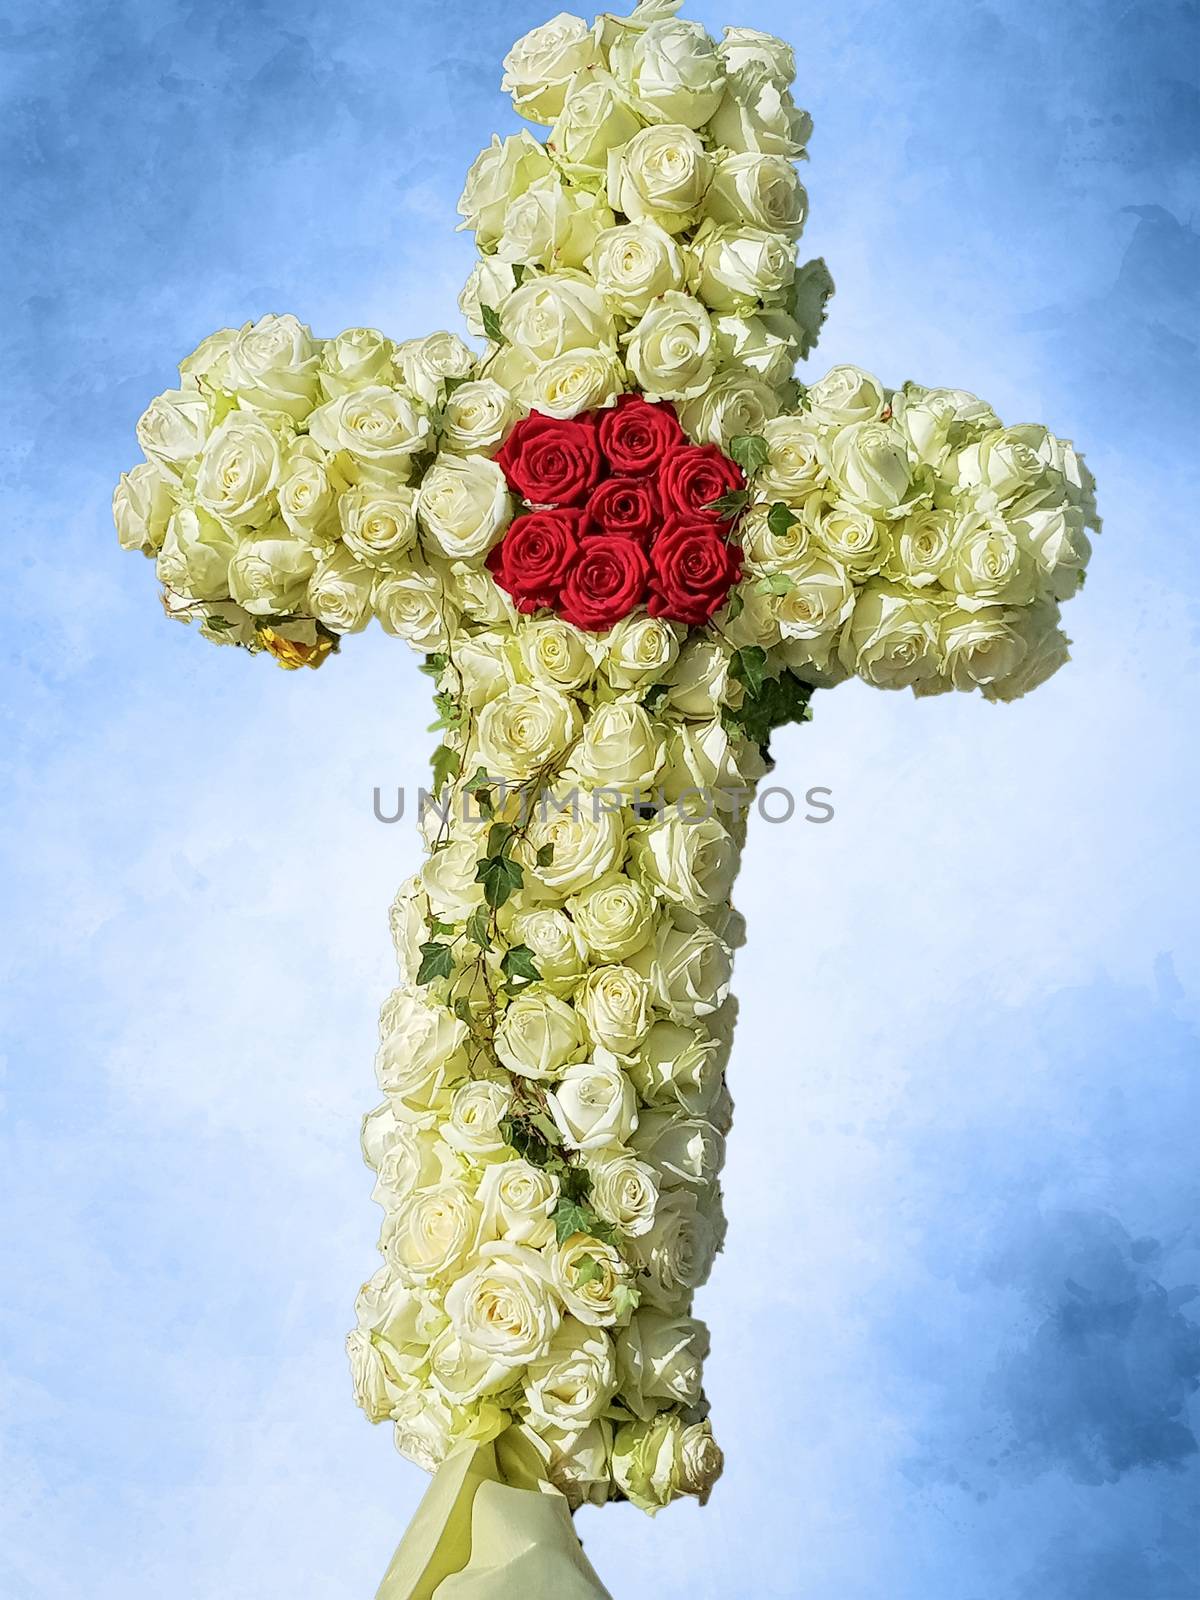 Cross made of flowers by JFsPic